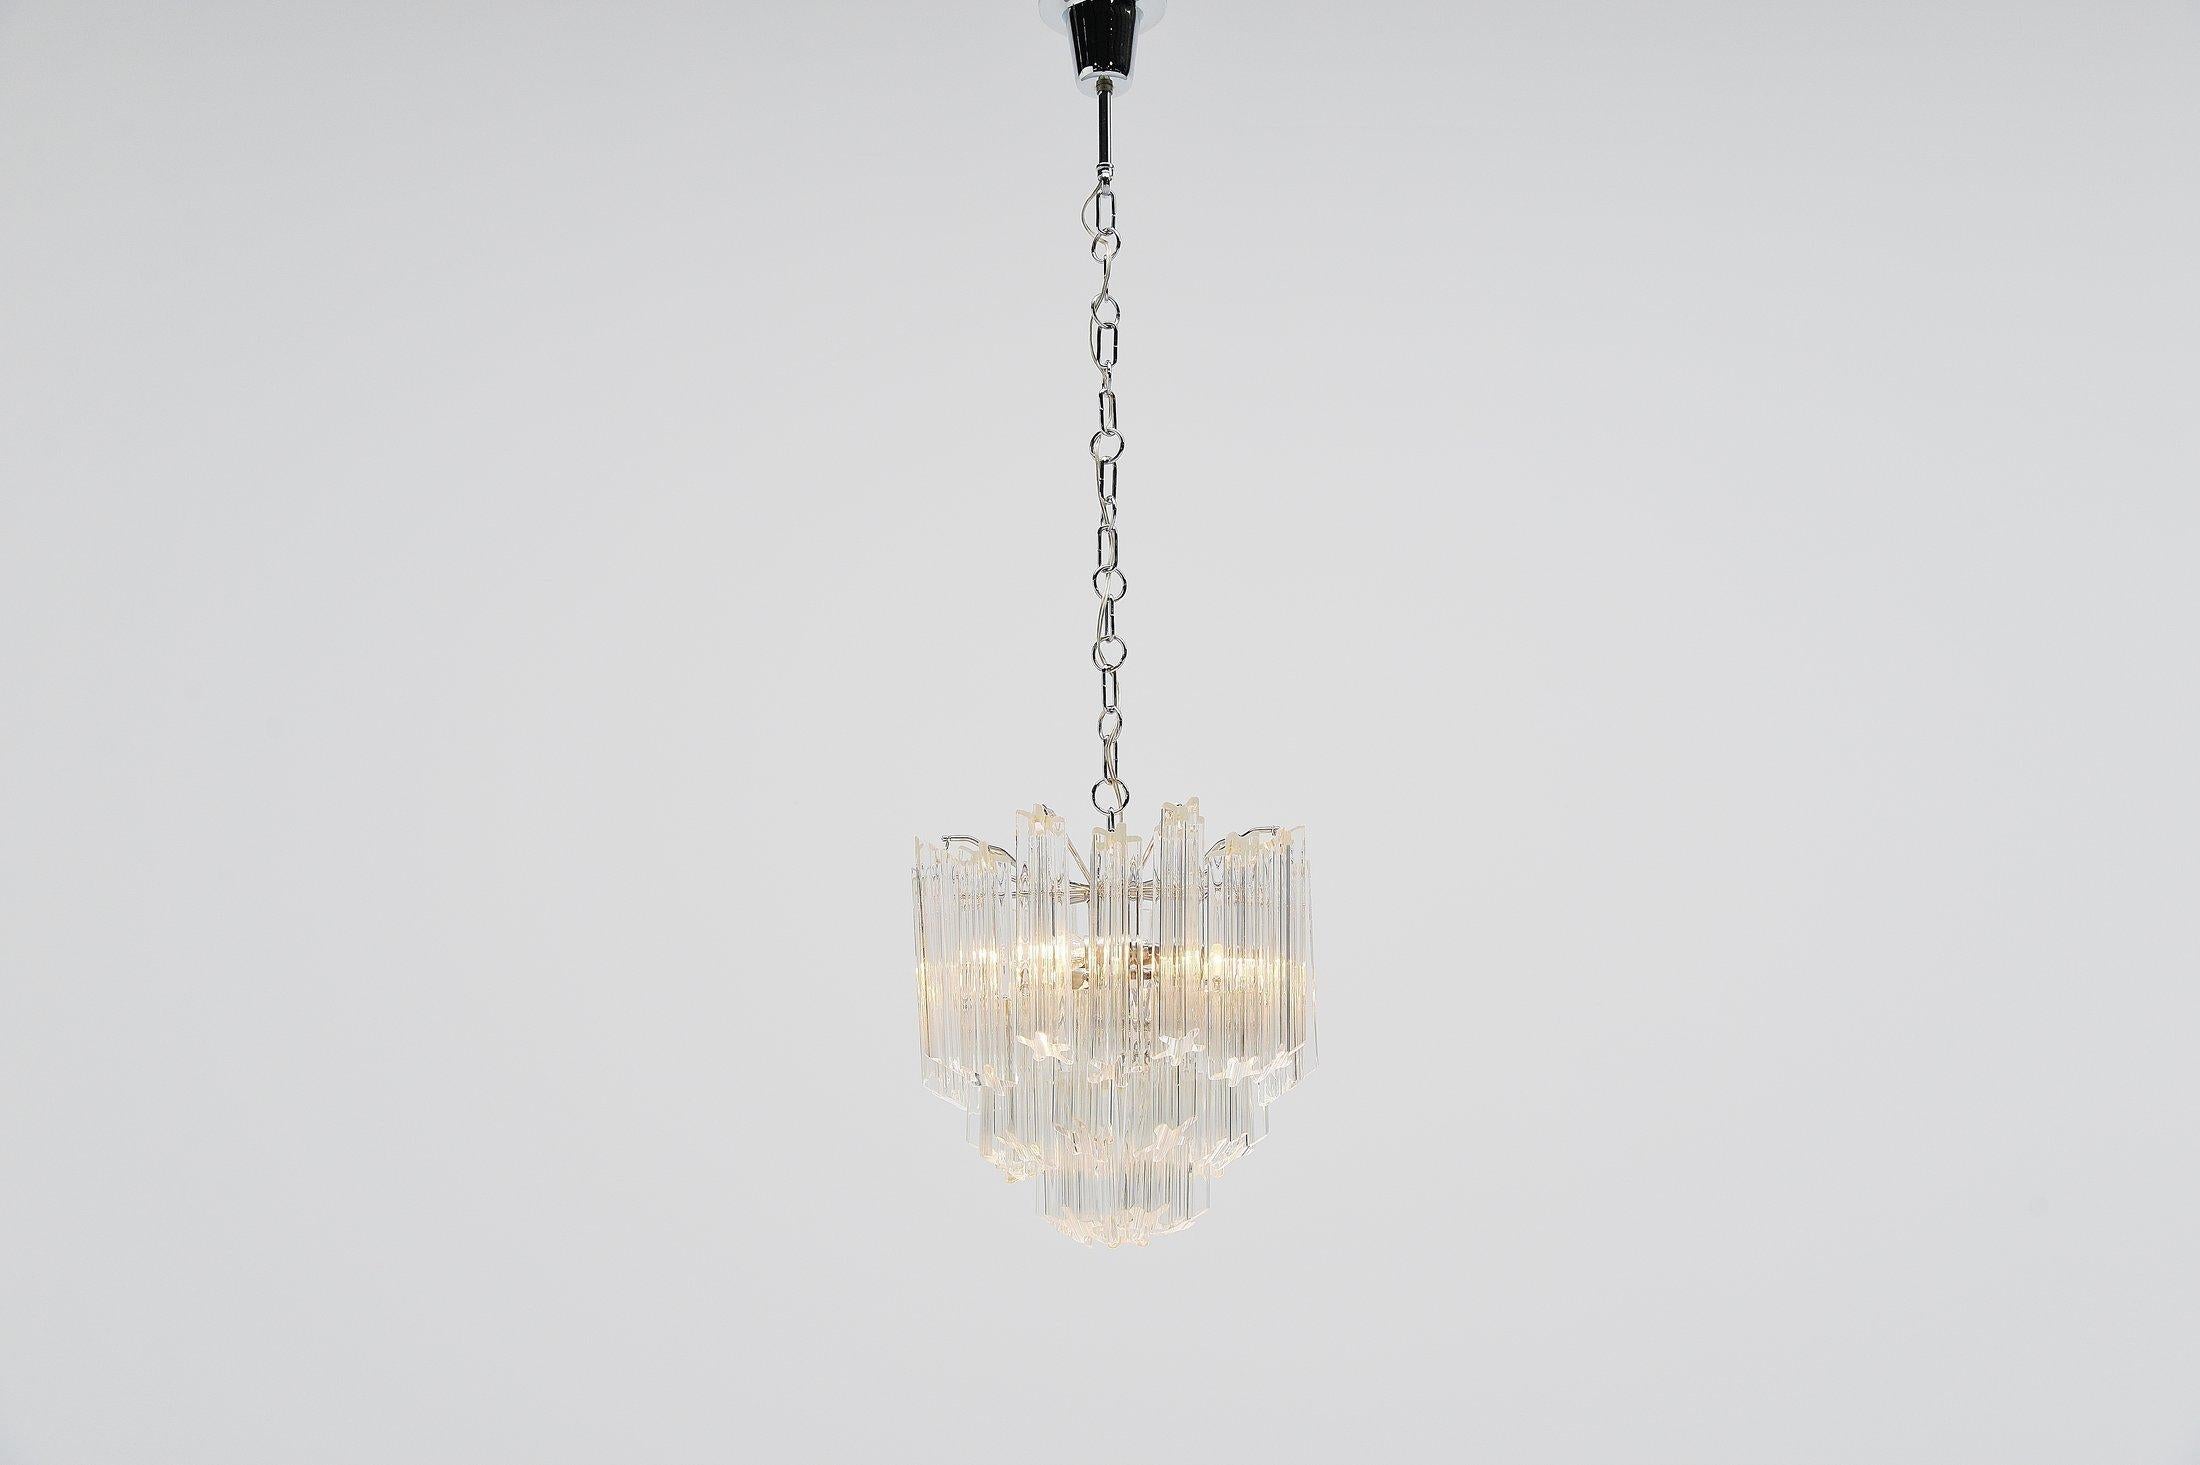 Nice and decorative chandelier designed by Paolo Venini, manufactured by Venini in Murano, Italy 1960. Chrome-plated structure with 32 clear glass pegs. Chandelier is in good and complete condition, gives great light when lit. The lamp uses 3x E14